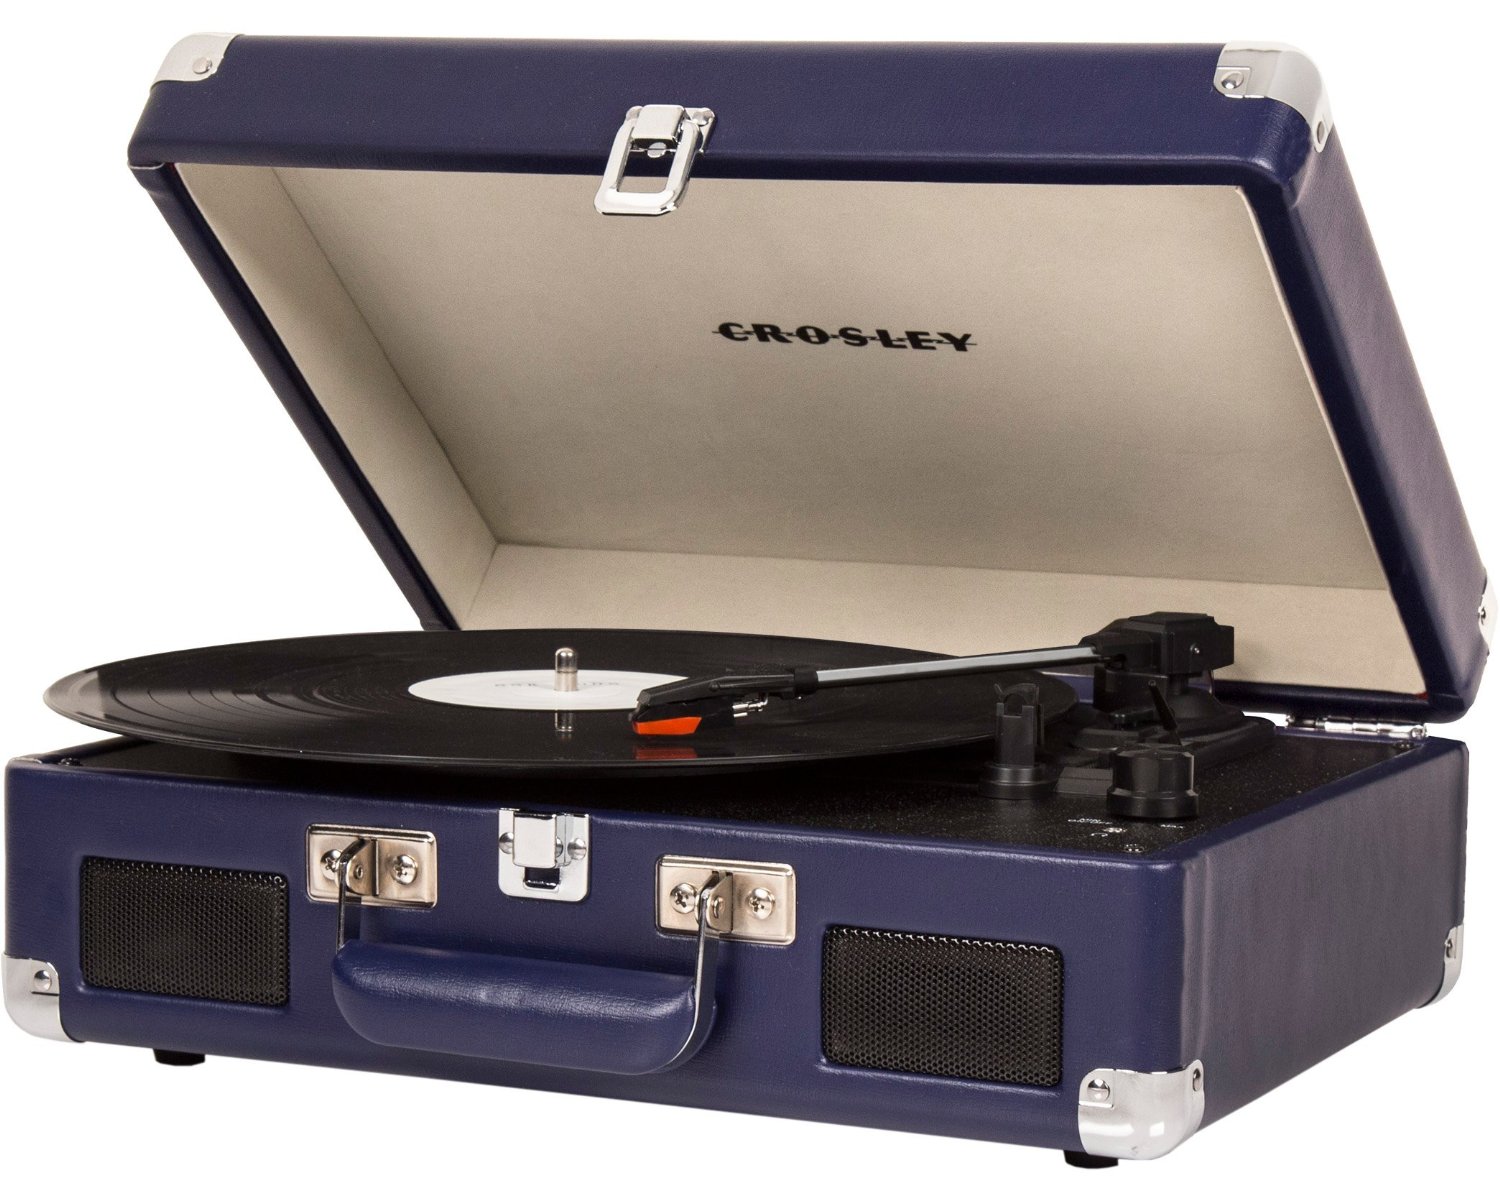 PRIME DEAL OF THE DAY – Crosley Cruiser II Portable Battery Powered 3-Speed Turntable – $59.95!